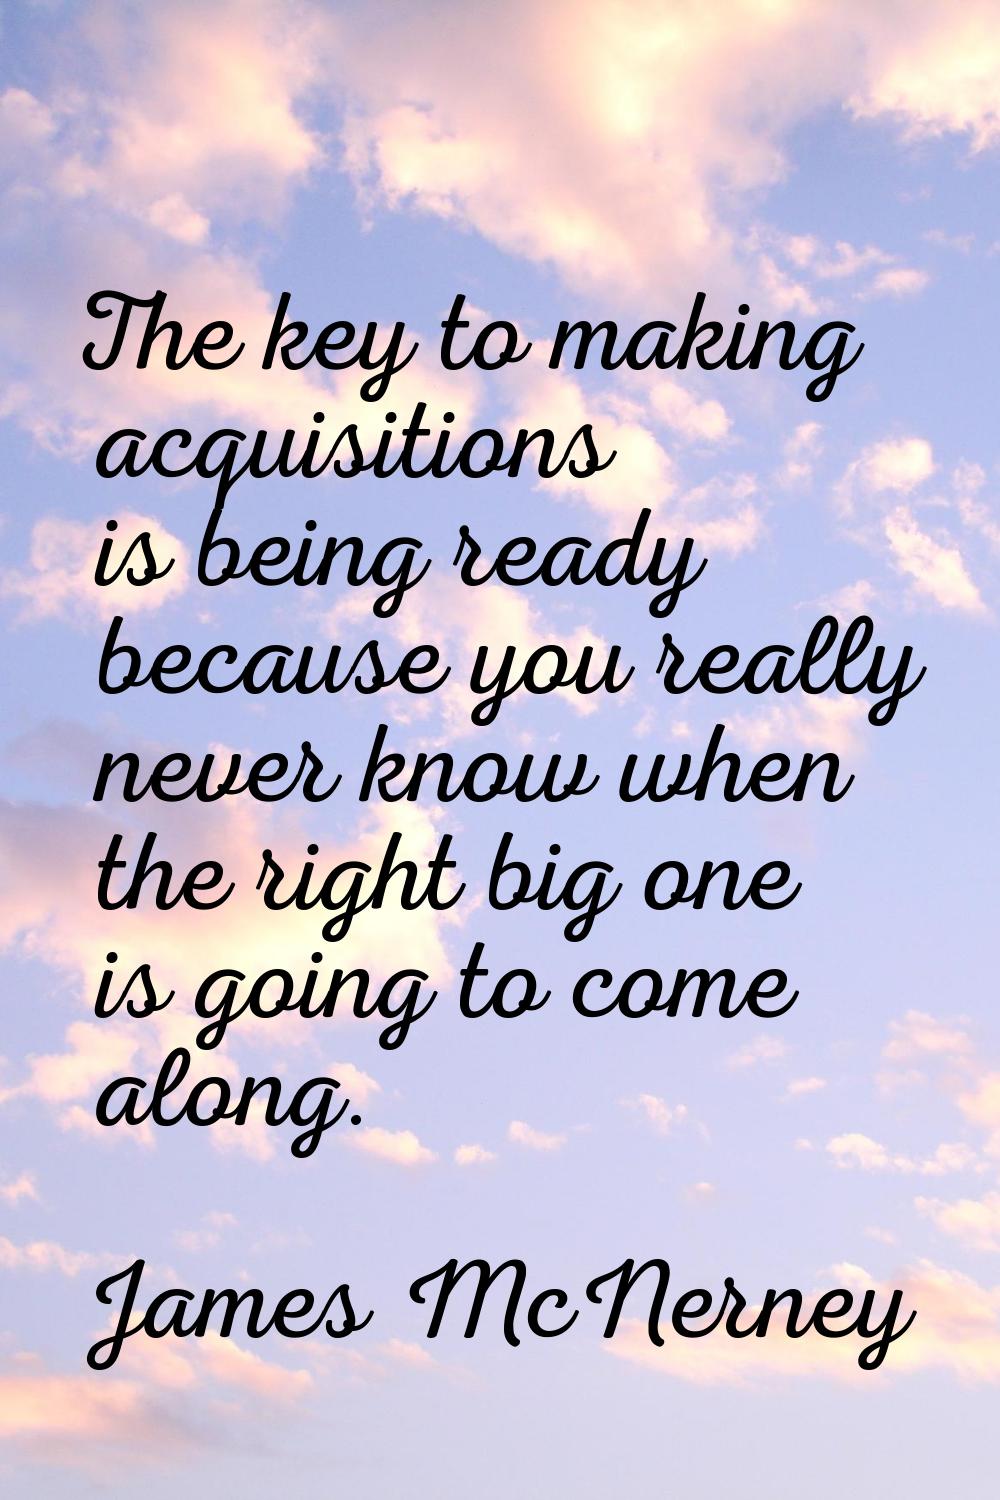 The key to making acquisitions is being ready because you really never know when the right big one 